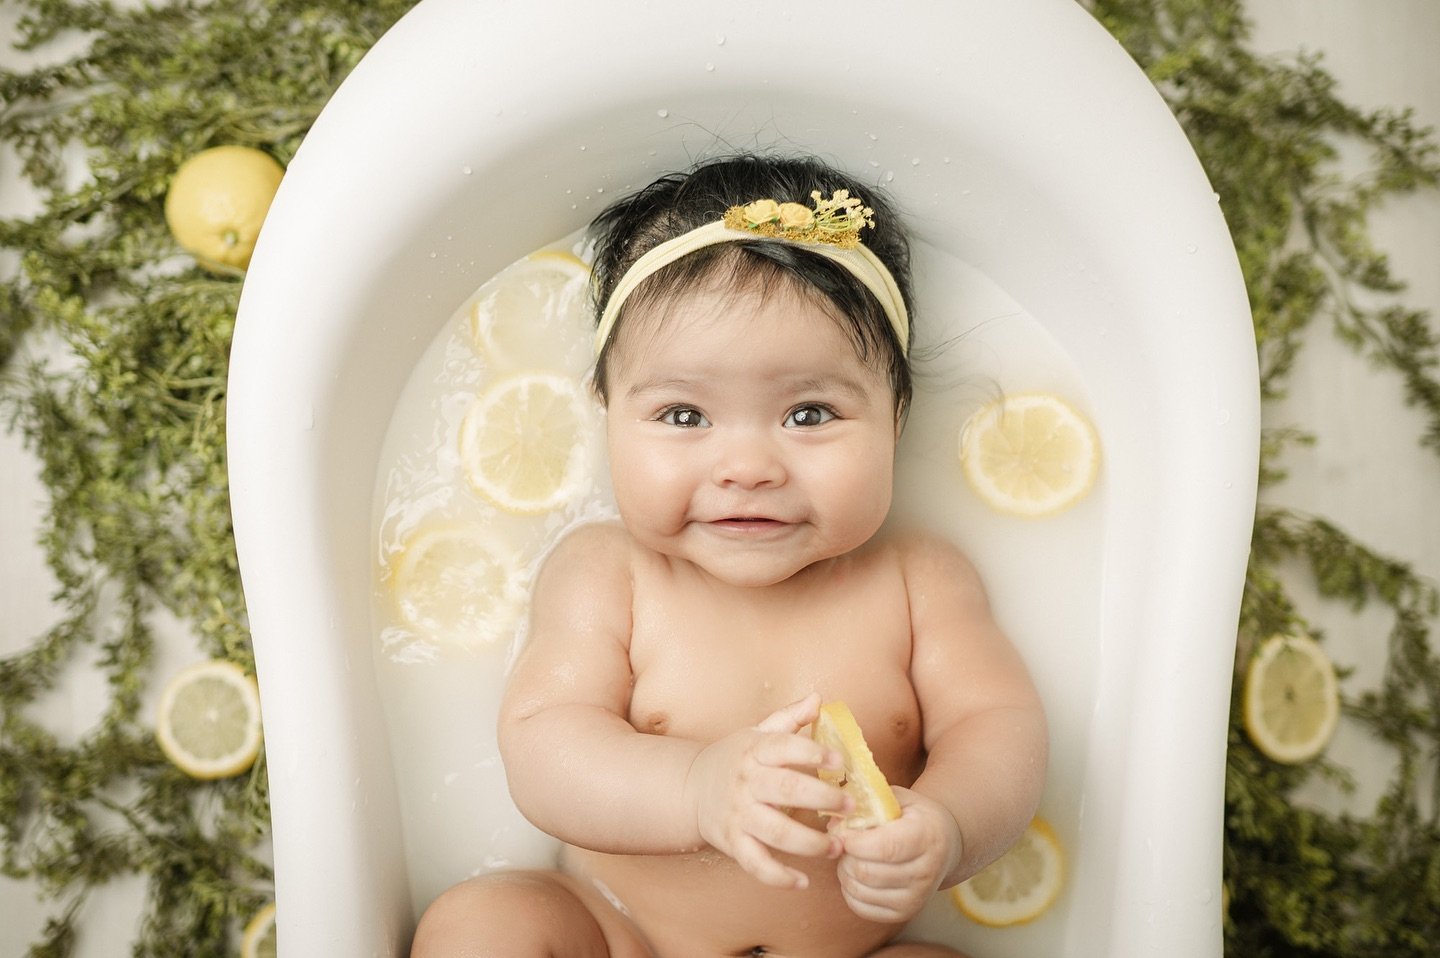 Now offering milk bath add ons for our milestone and cake smash sessions! We can add fruits, florals or just milk! Recommended for babies who can sit independently and love the water!

#houstonmilestonephotographer #houstonfamilyphotographer #houston